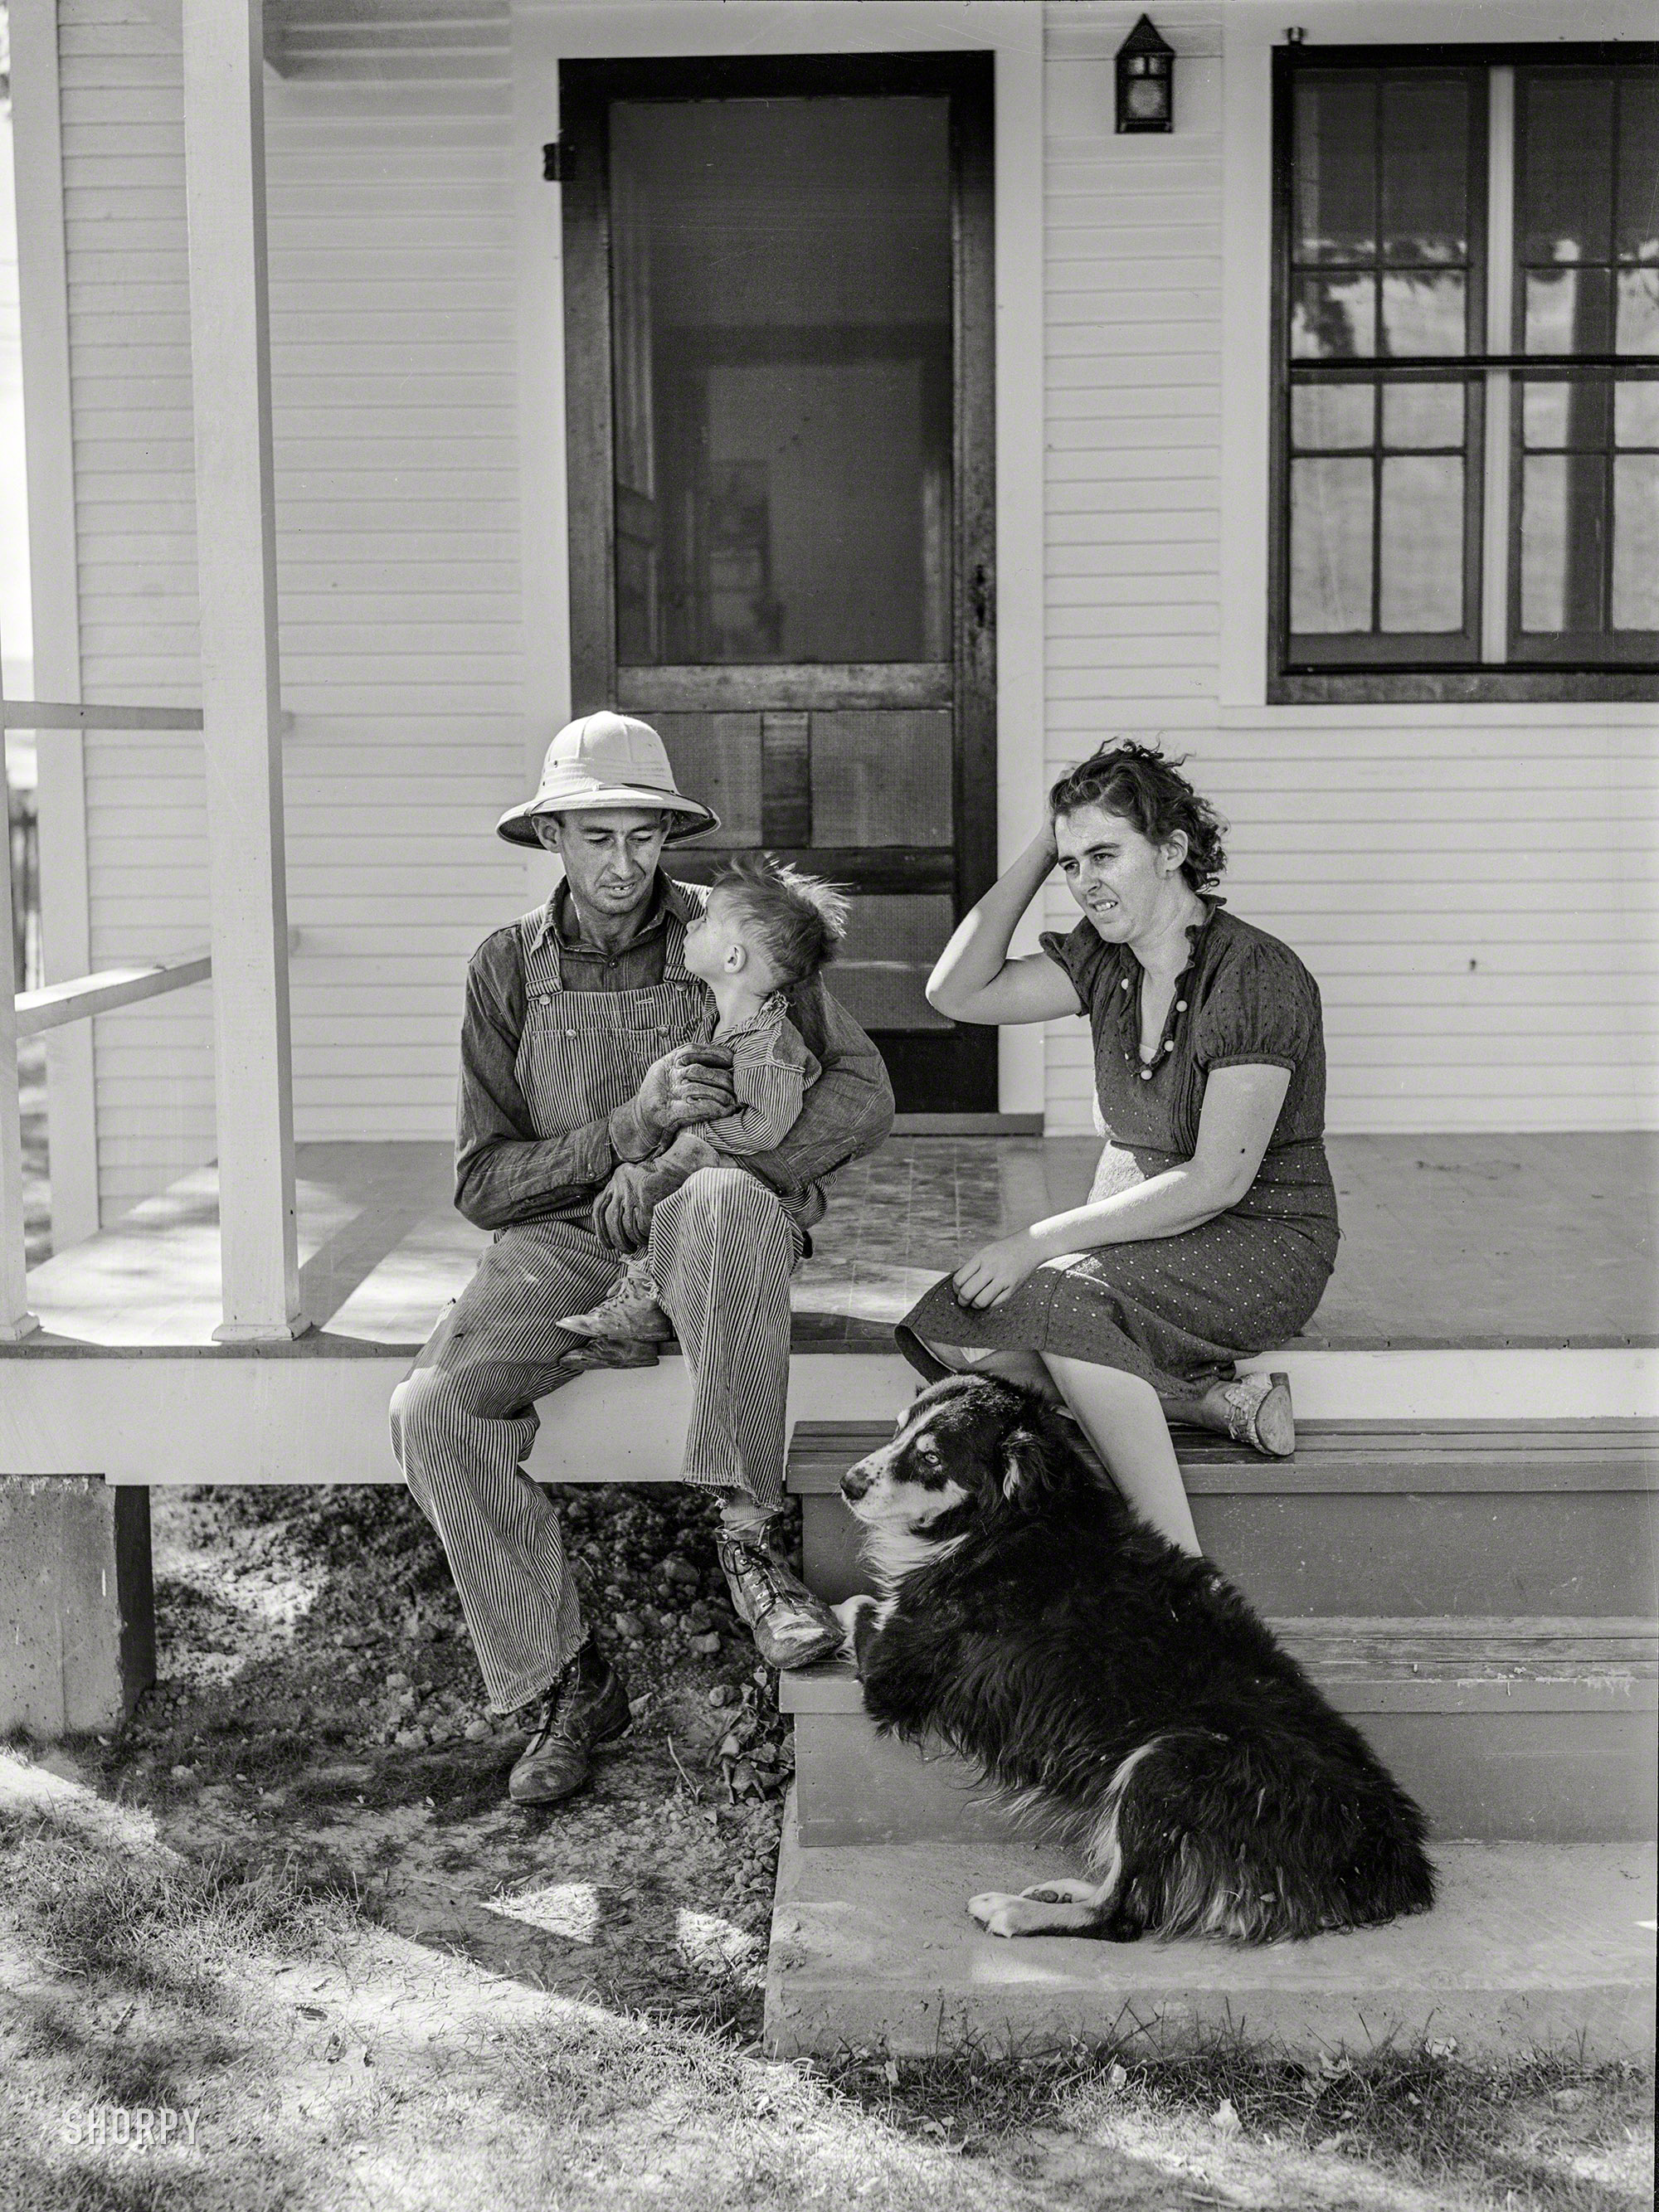 October 1939. "Carl Higgins family, tenant purchase borrowers, on the porch of their farmstead in Mesa County, Colorado." Medium format negative by Arthur Rothstein for the Farm Security Administration. View full size.